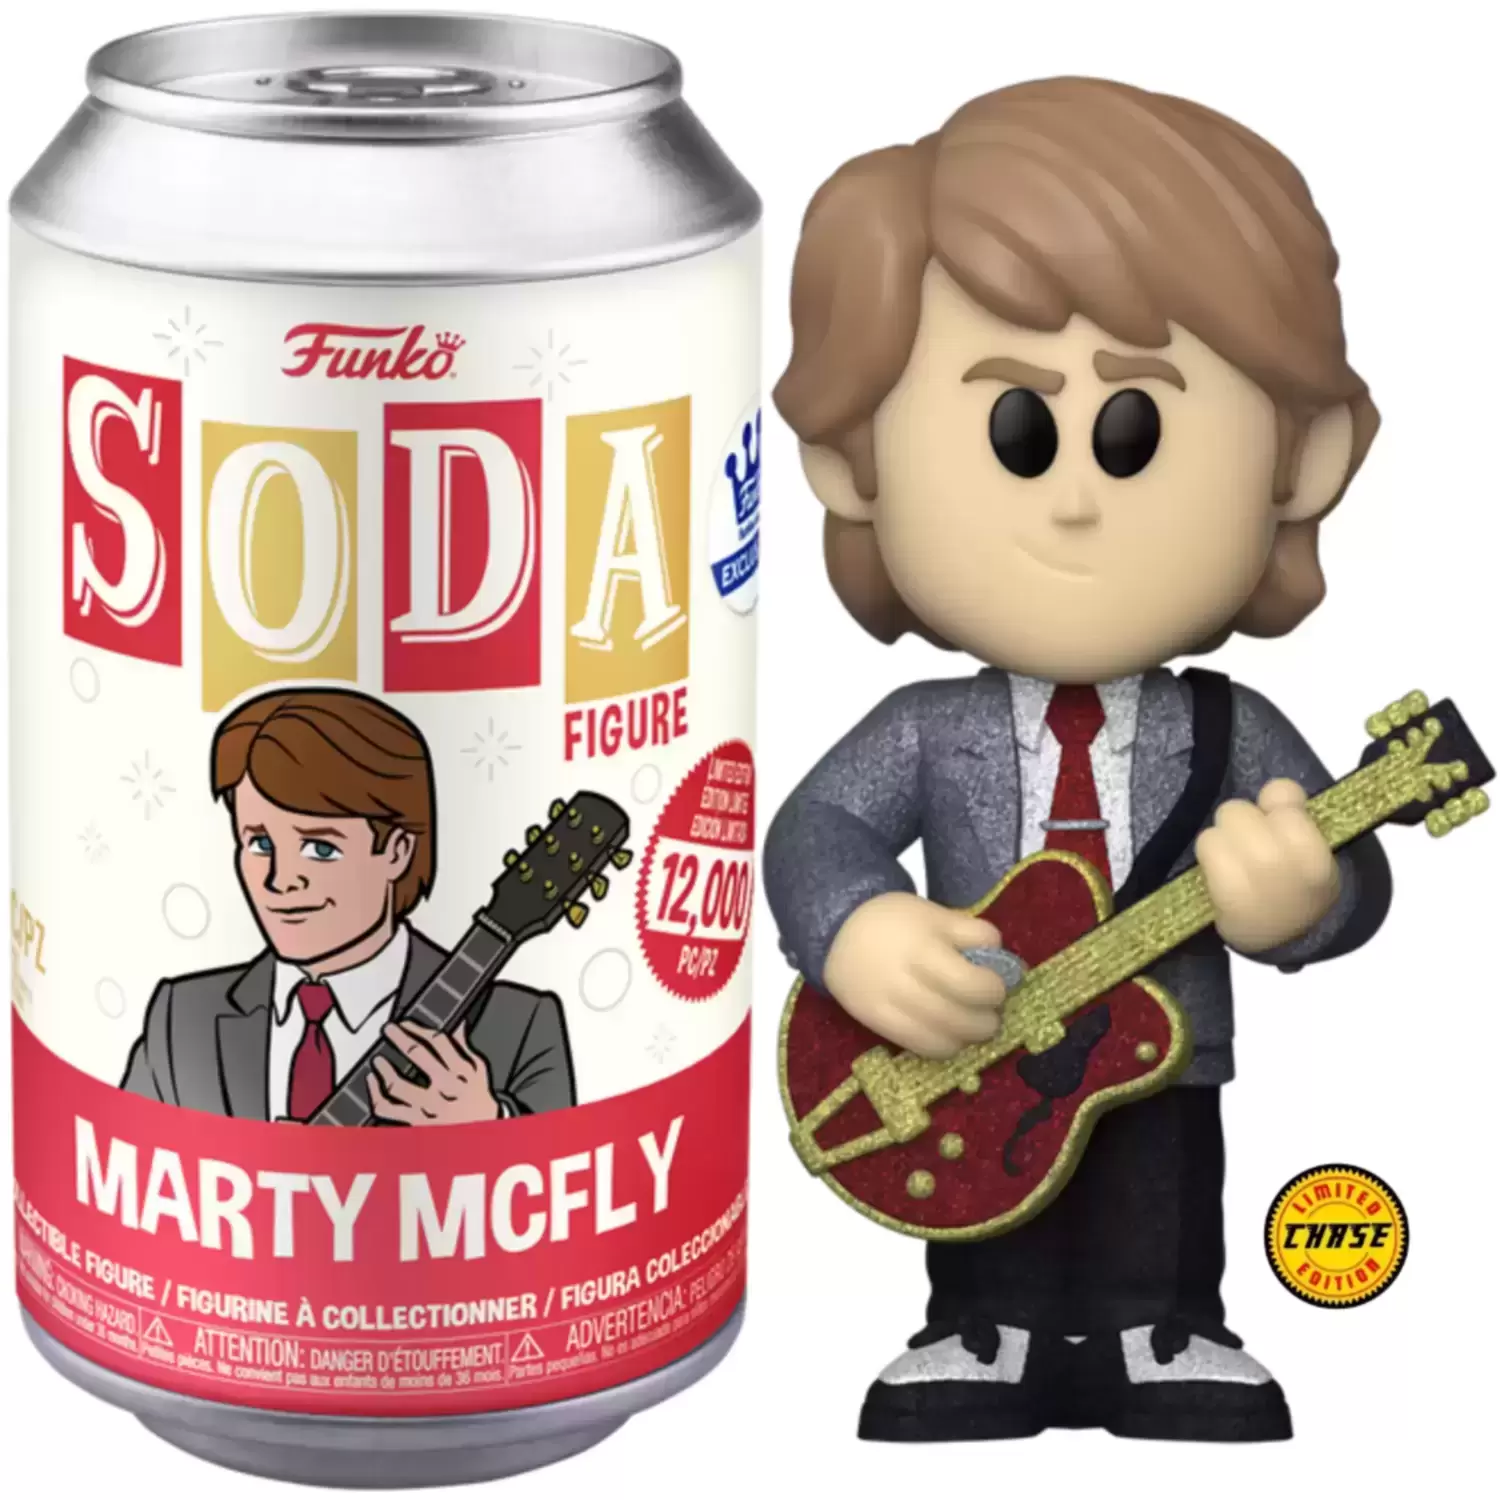 Vinyl Soda! - Back to The Future - Marty McFly Diamond Collection